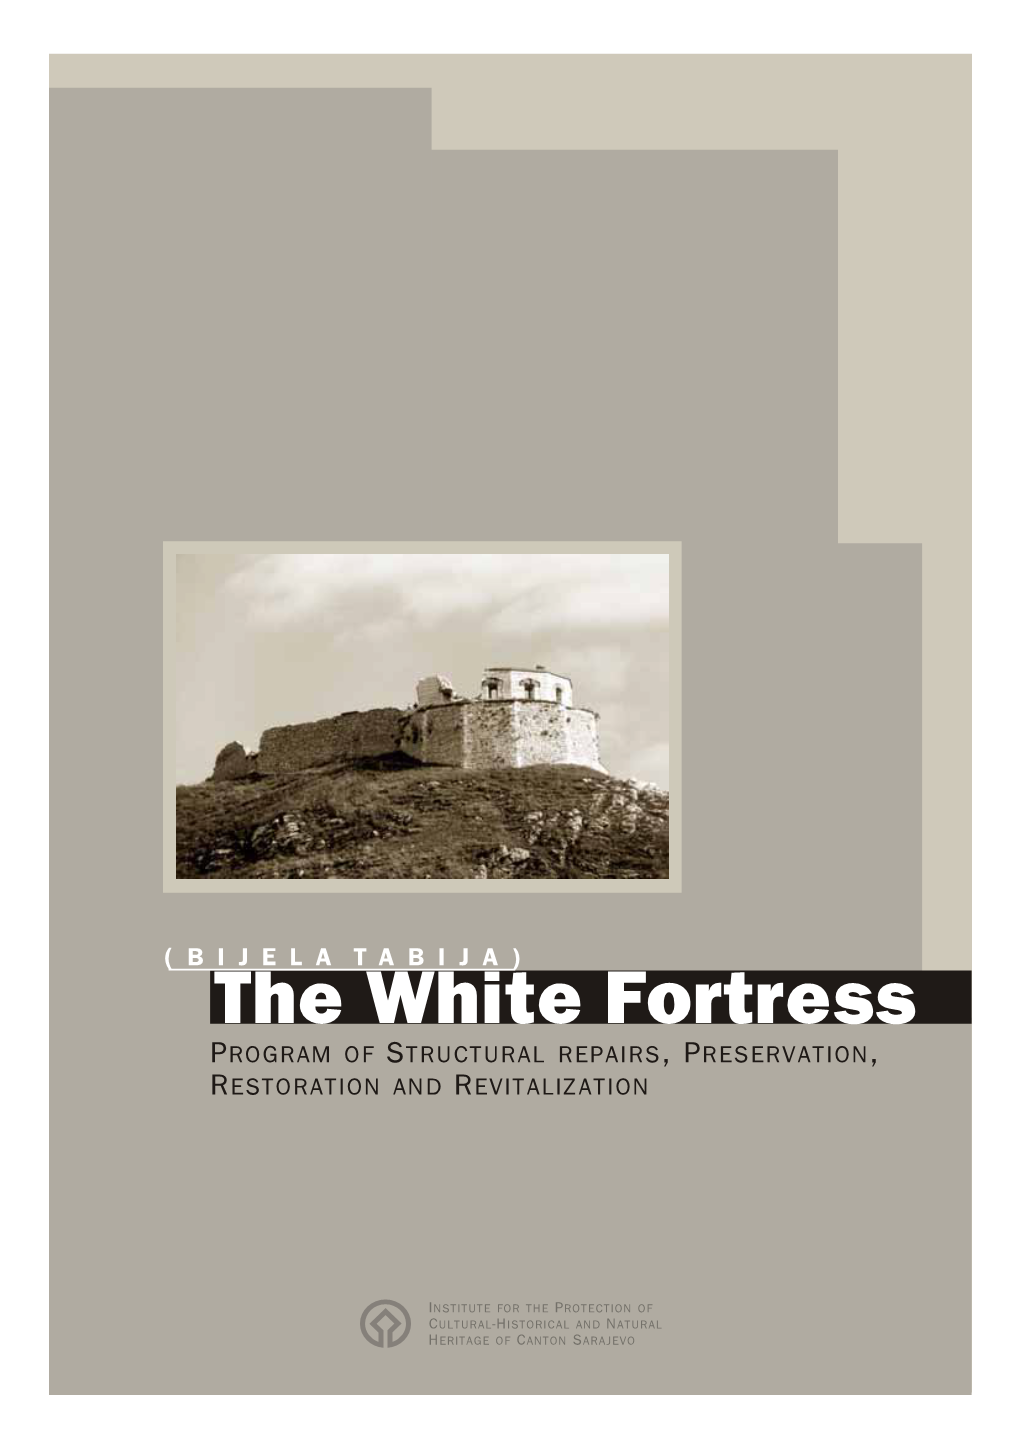 The White Fortress)